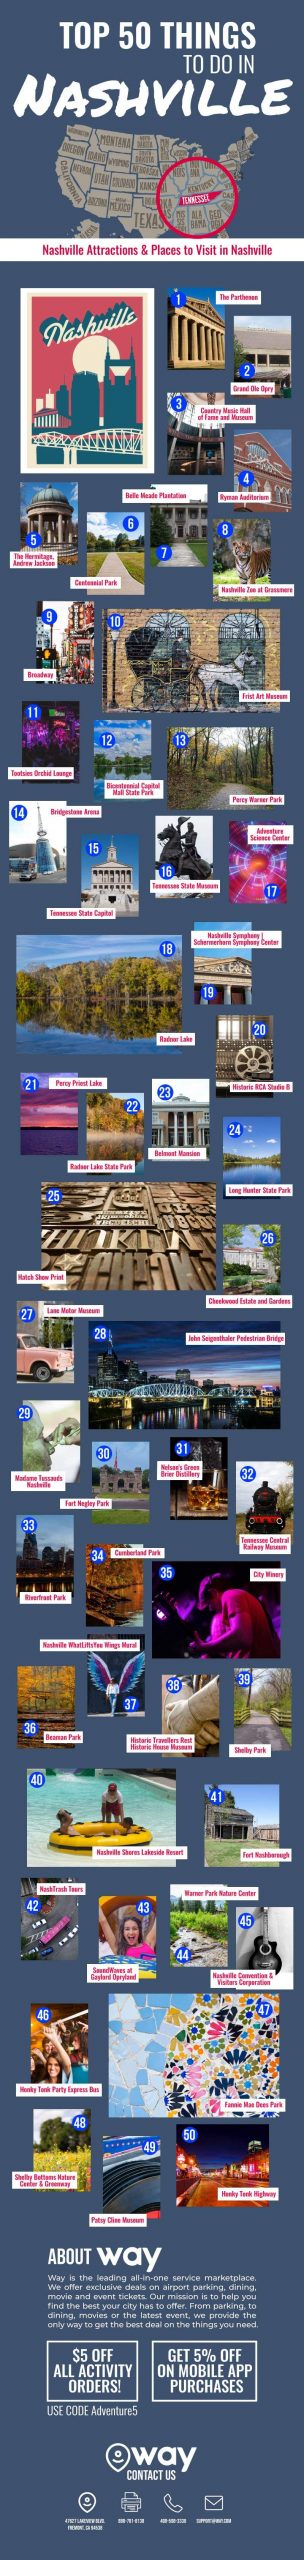 Top 50 Things to Do in Nashville